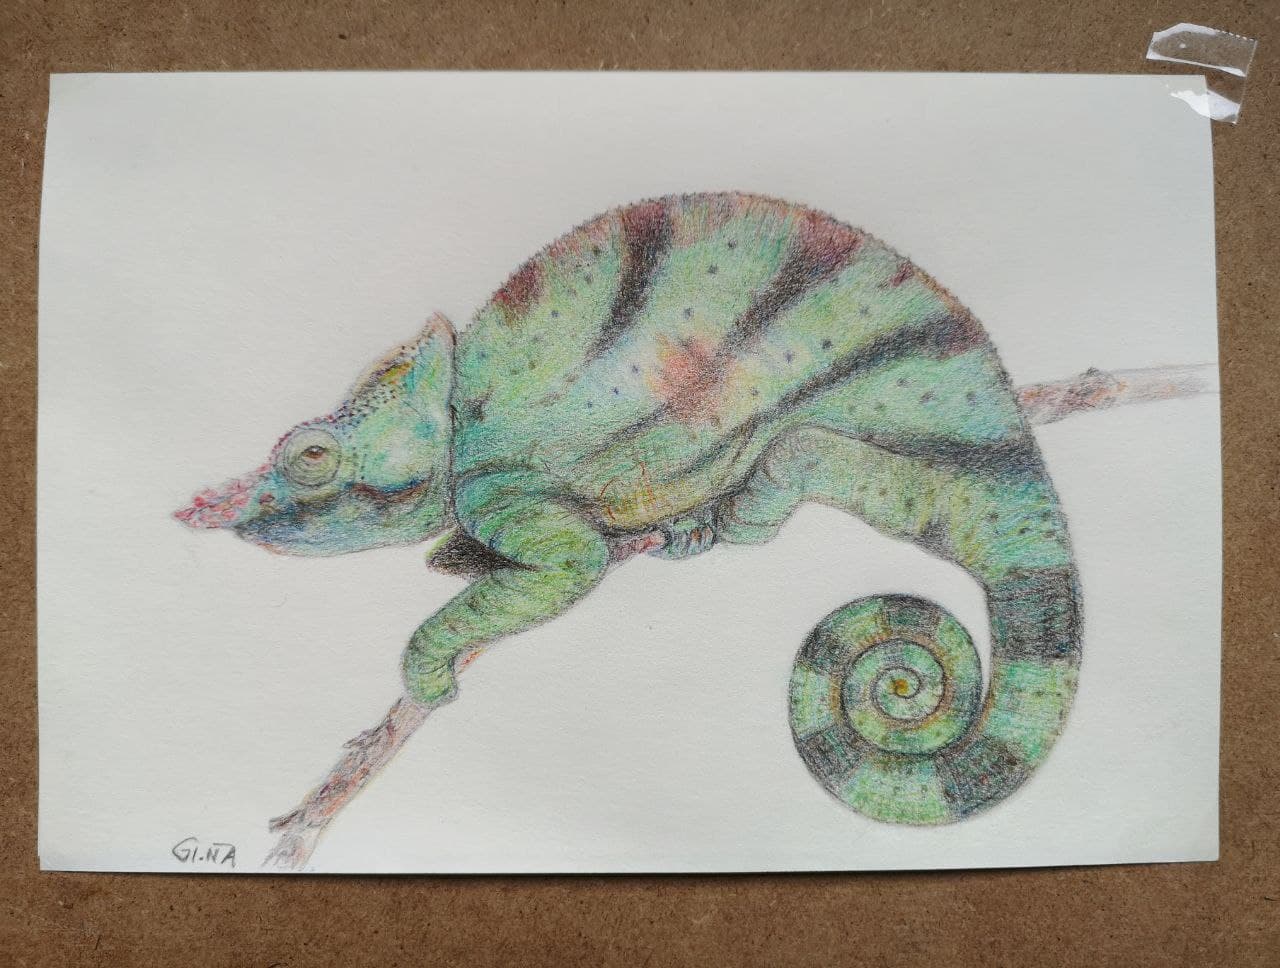 Chameleon Pencil Drawing